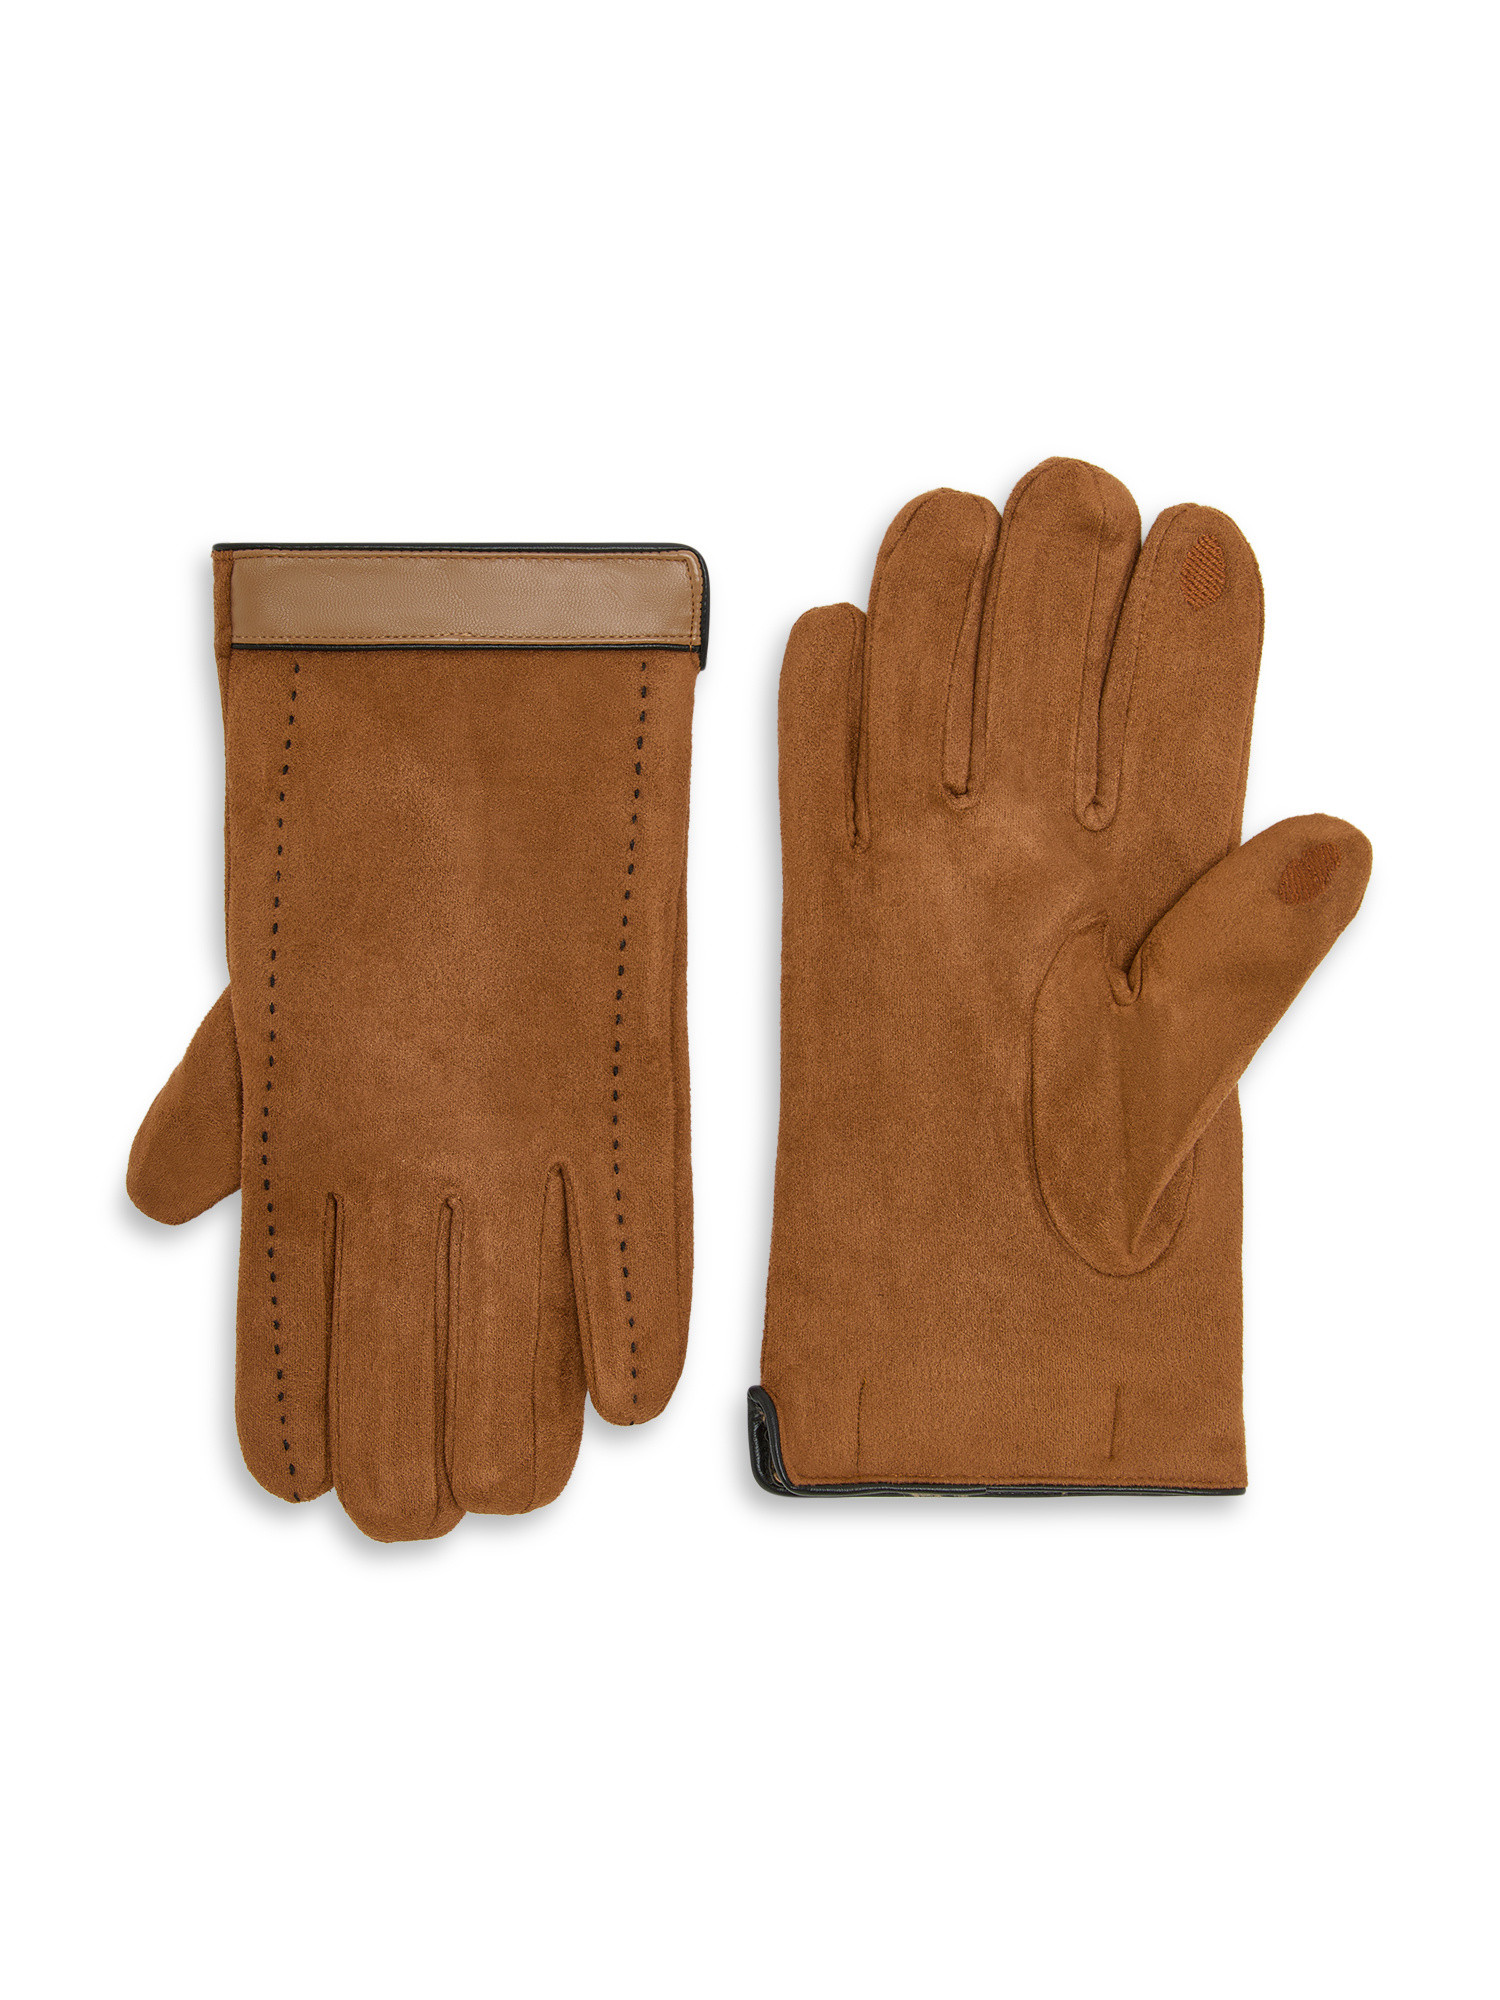 Luca D'Altieri - Gloves in peach fabric, Brown, large image number 0